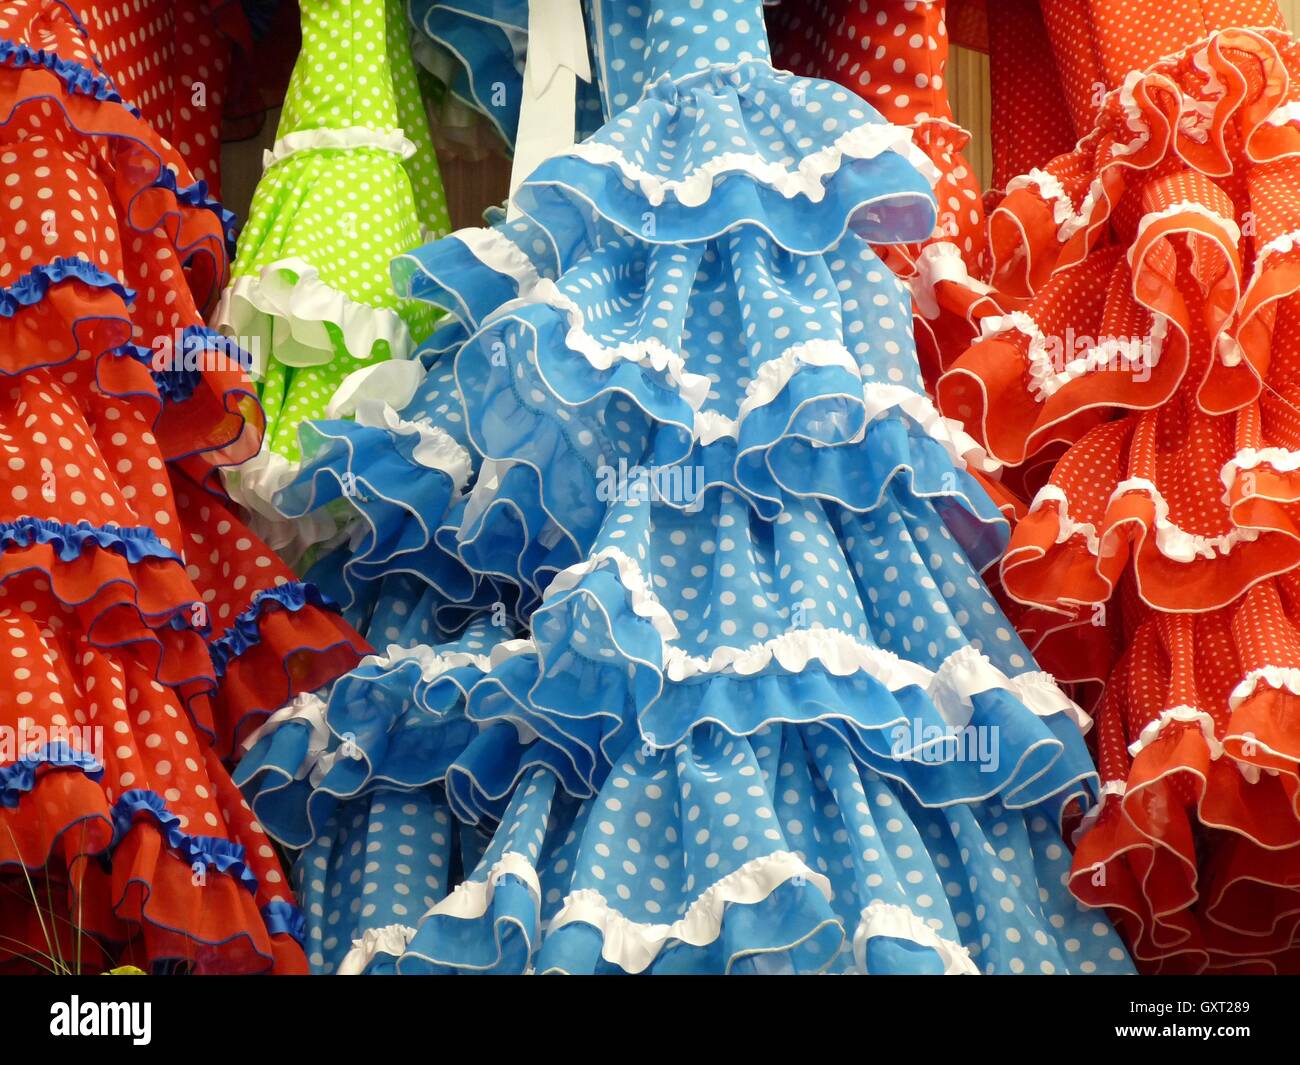 Close up of traditional blue, red, green and orange frilly flamenco dresses with white spots and lace trim hanging in a row Stock Photo